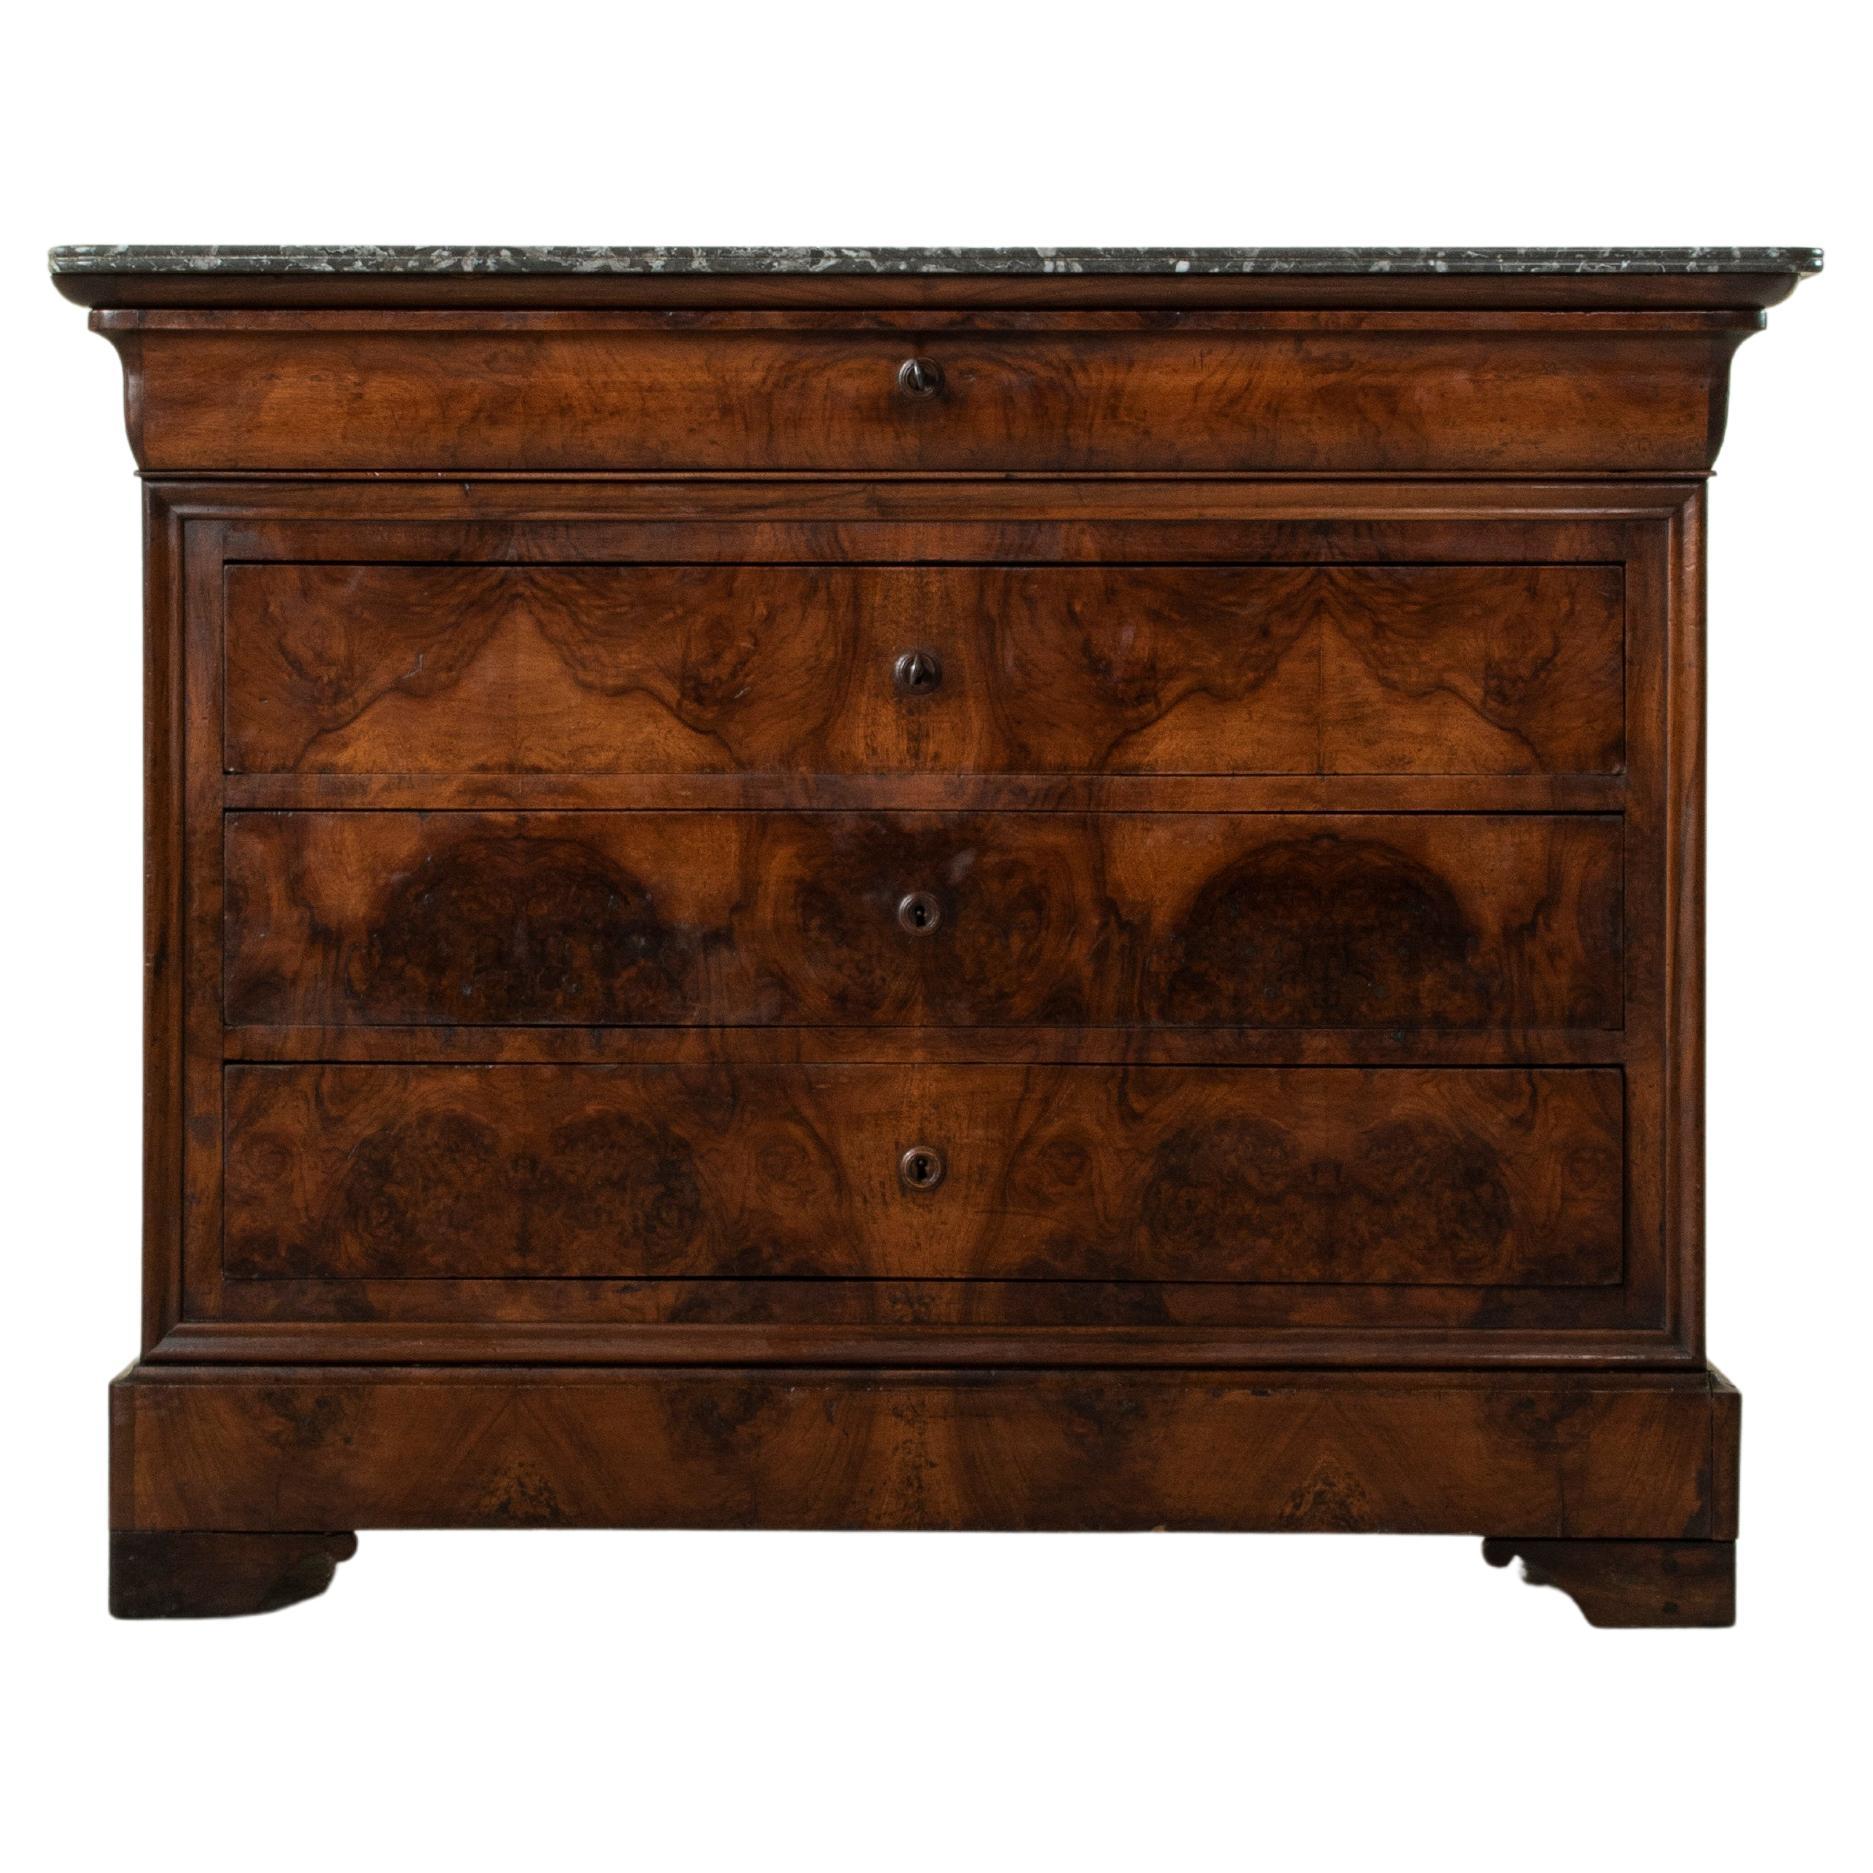 19th Century French Louis Philippe Period Bookmatched Walnut Chest, Marble Top